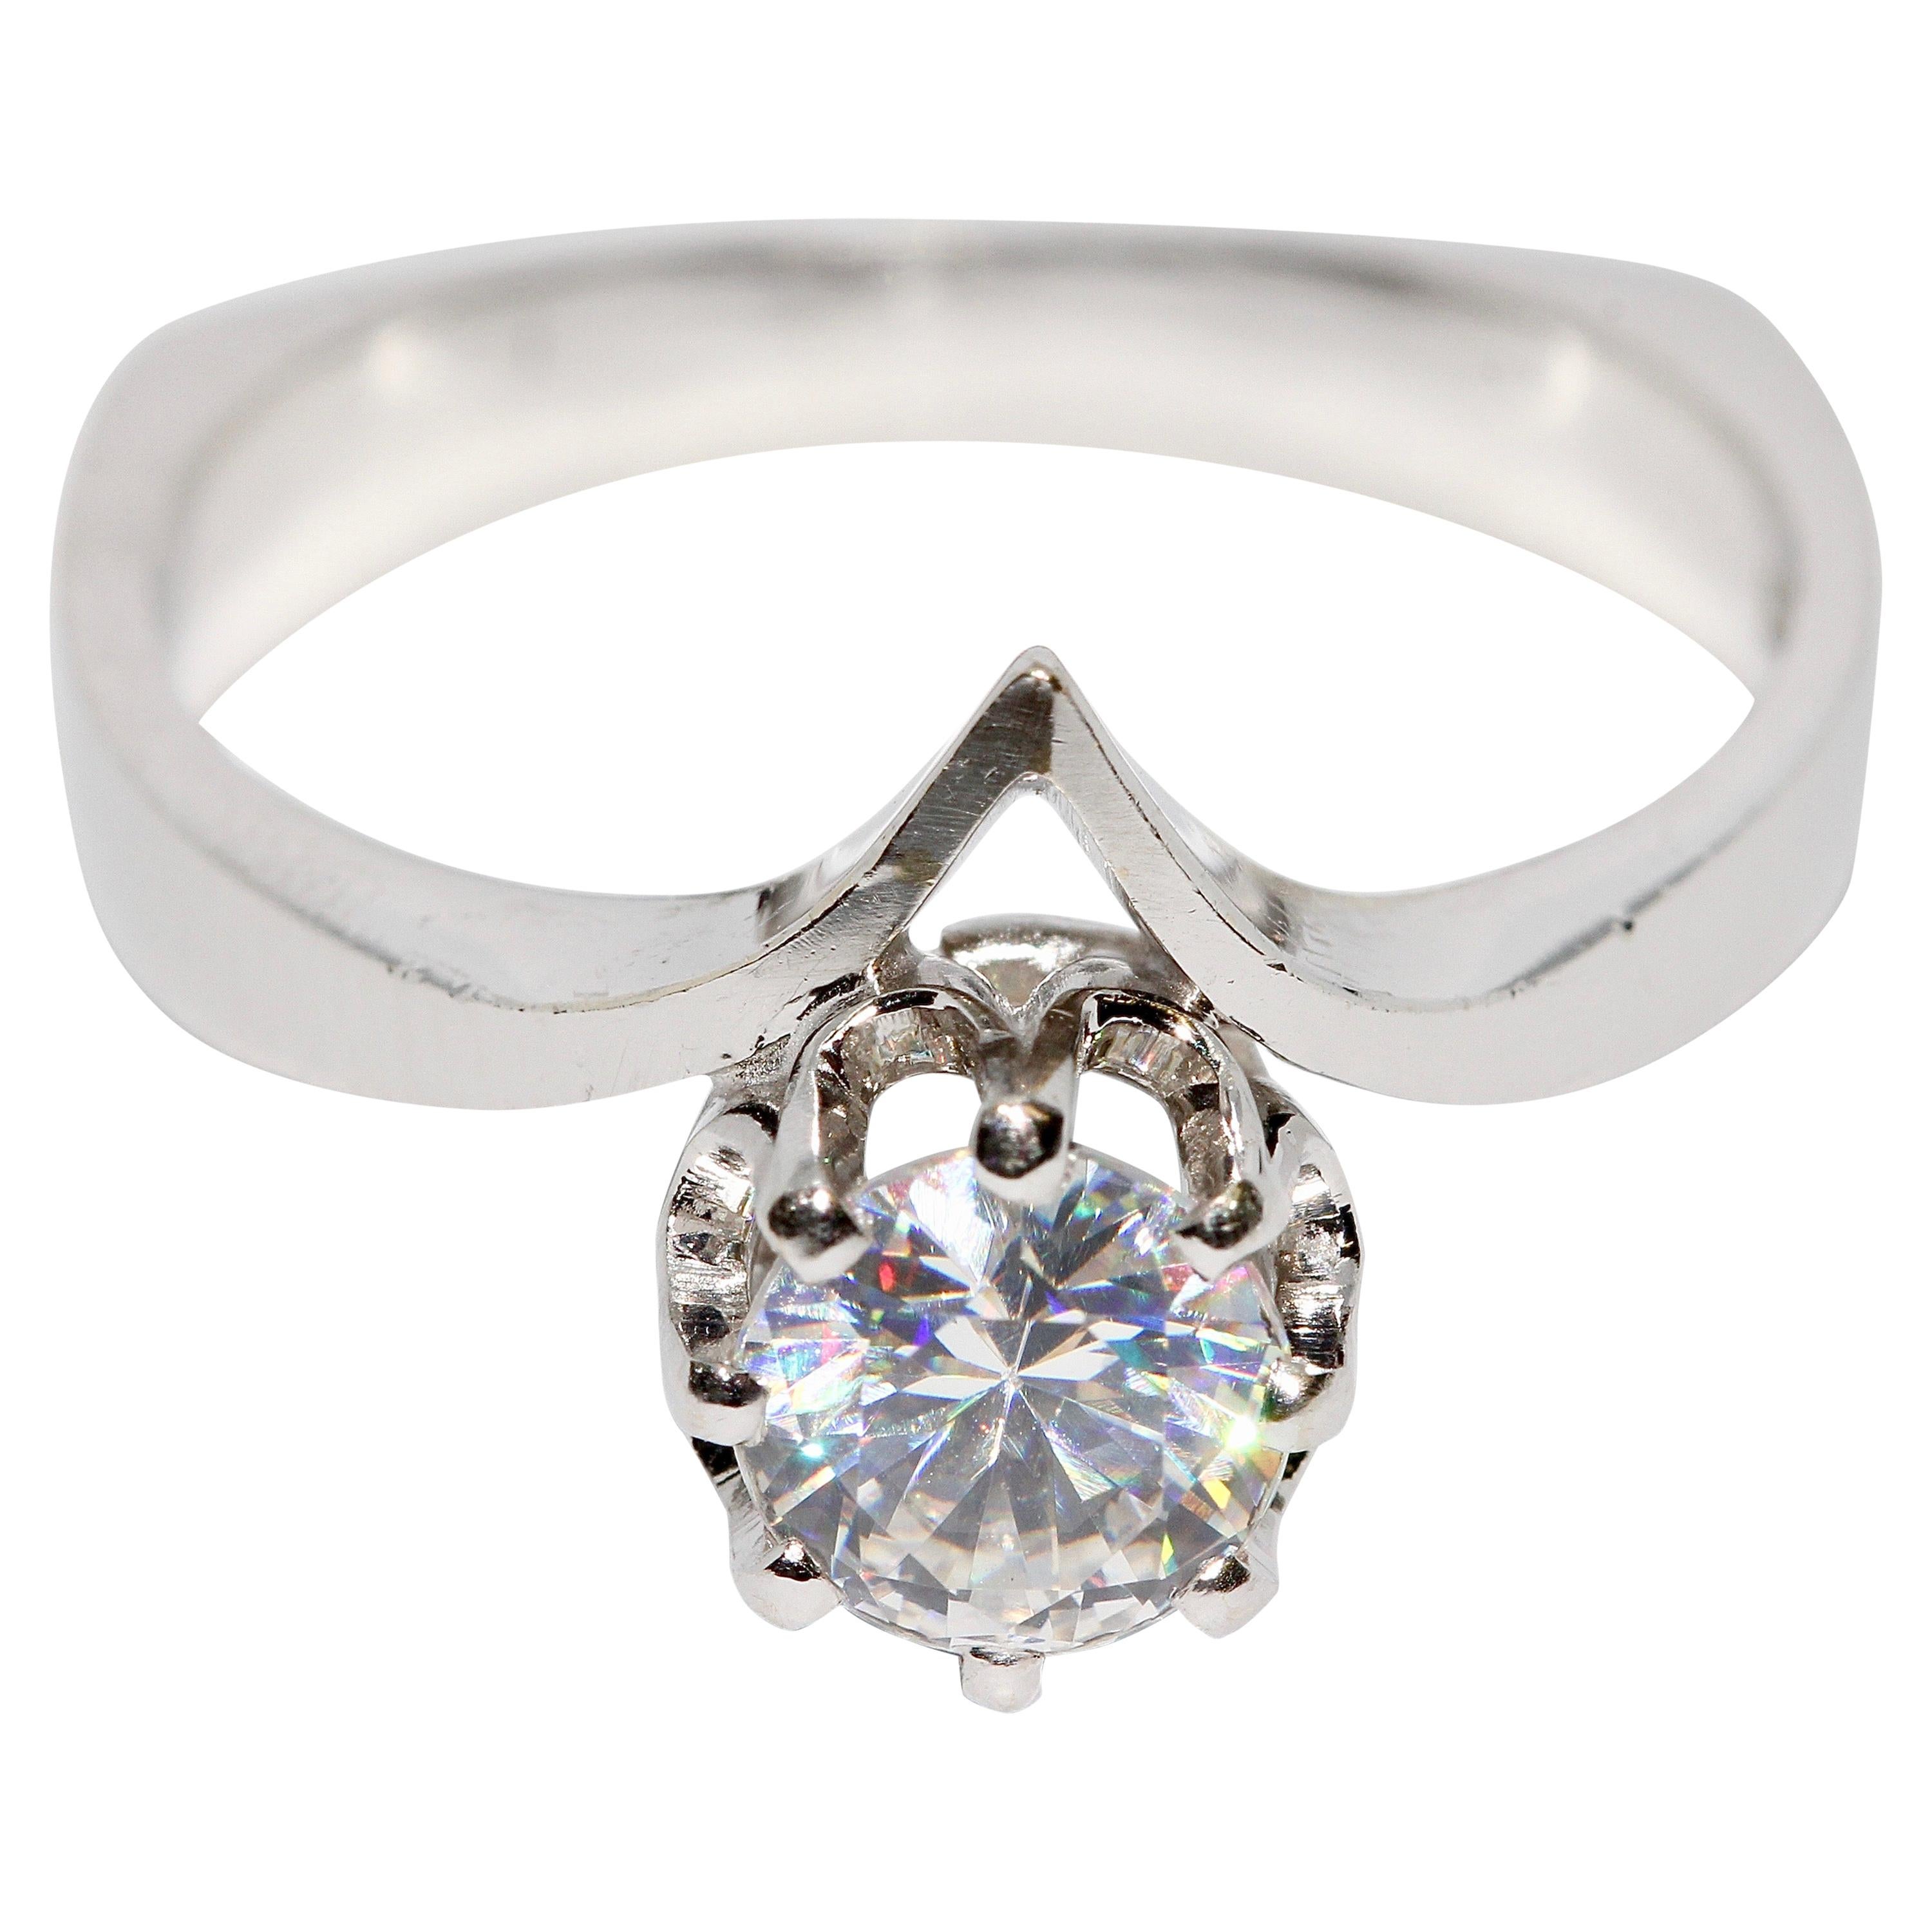 White Gold Solitaire Ring with 0.8 Carat Diamond, Top Wesselton, VVS2